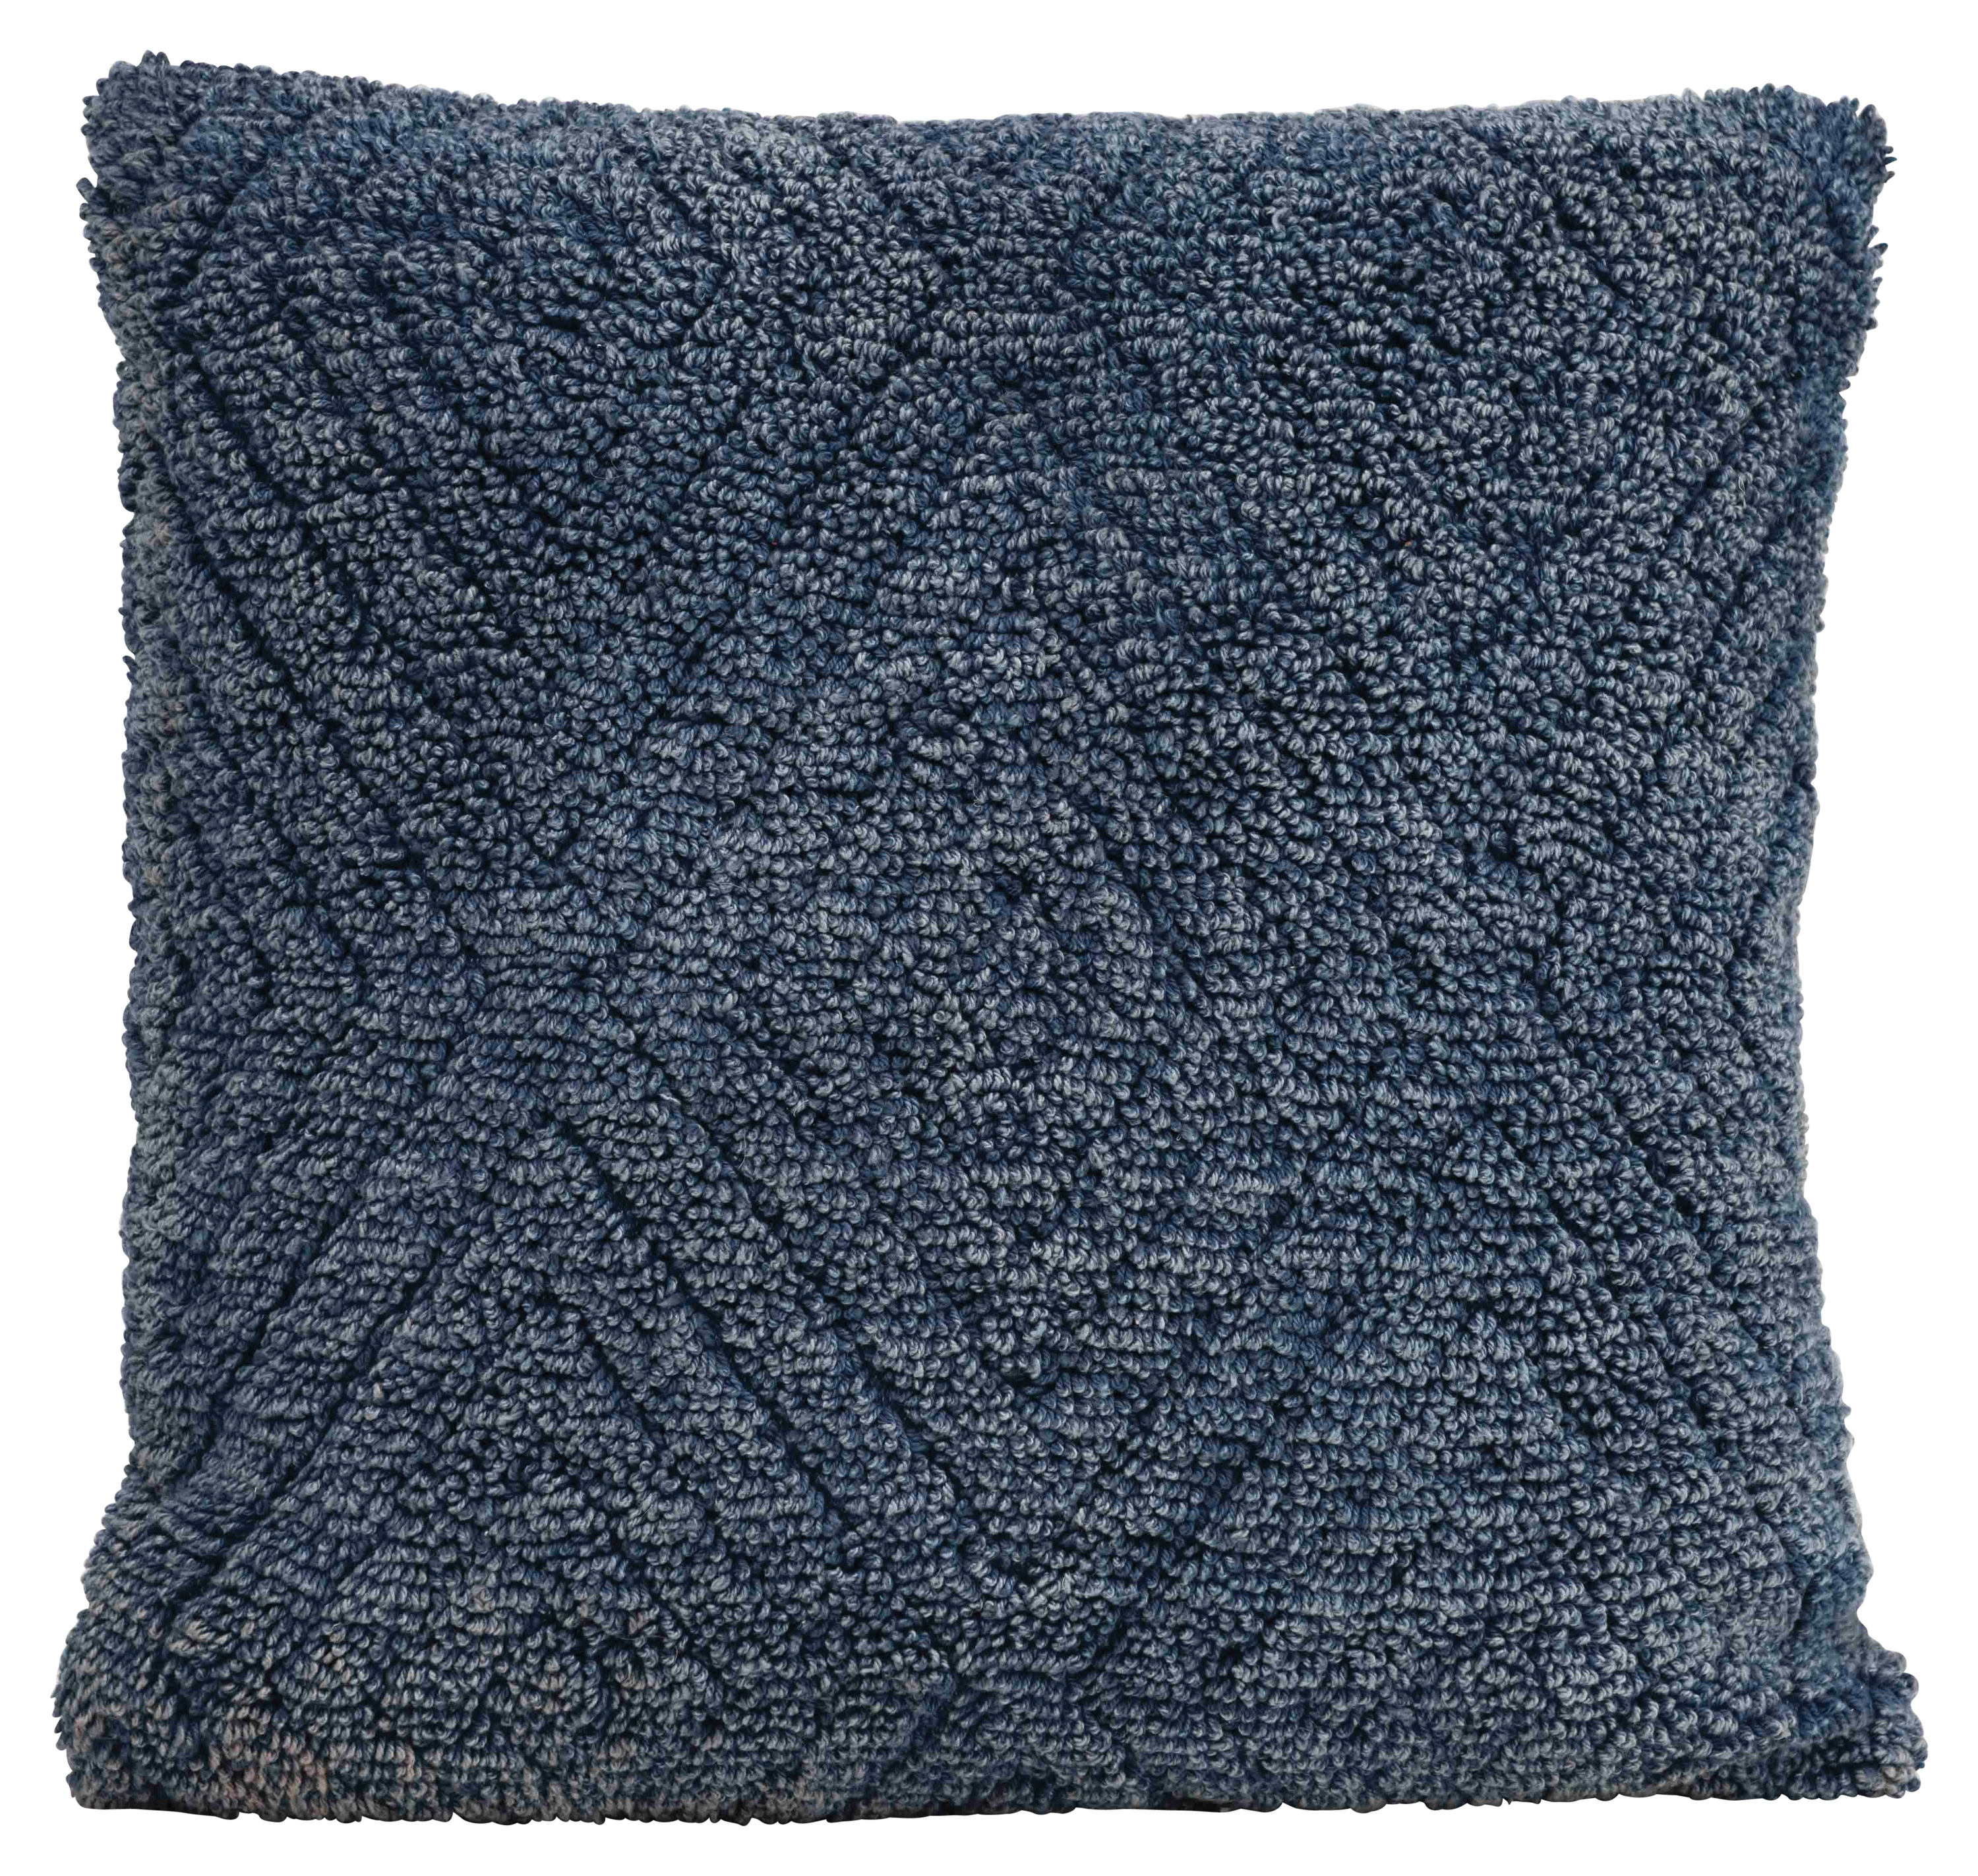 Square Cotton Blend Knit Pillow with Diamond Pattern - Image 0